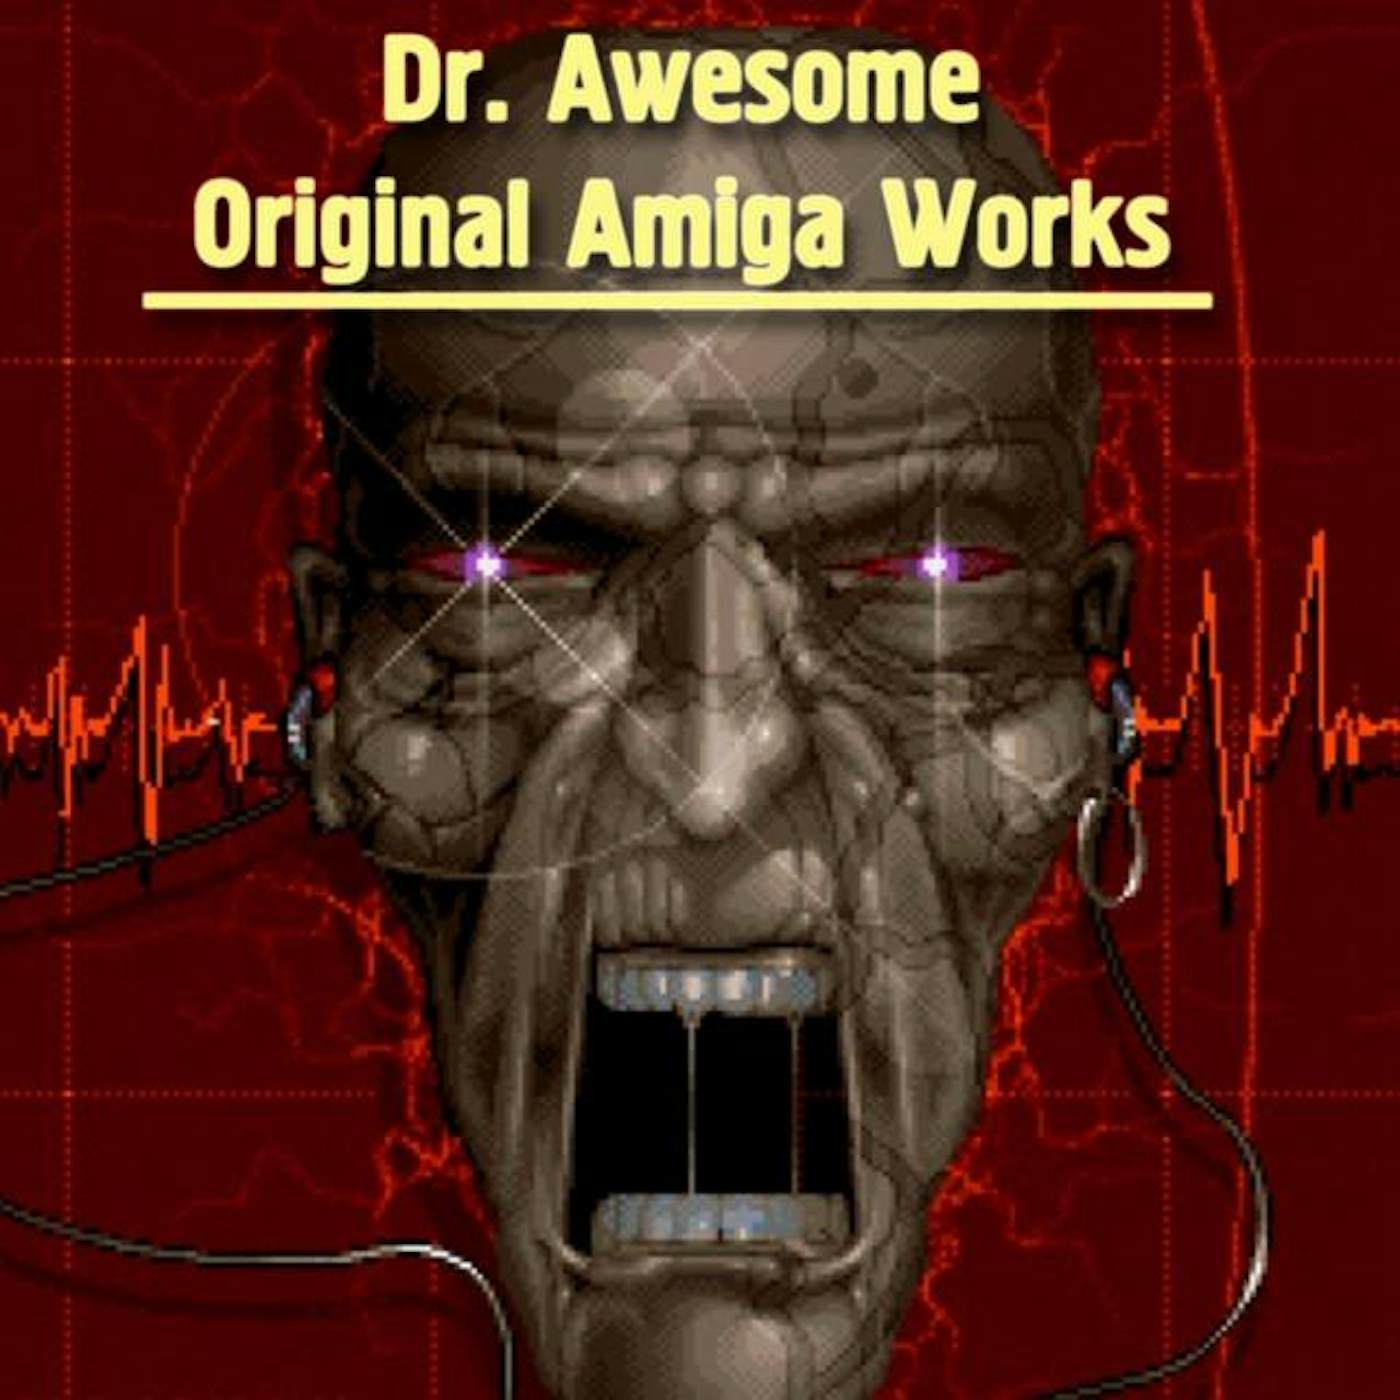 Dr. Awesome